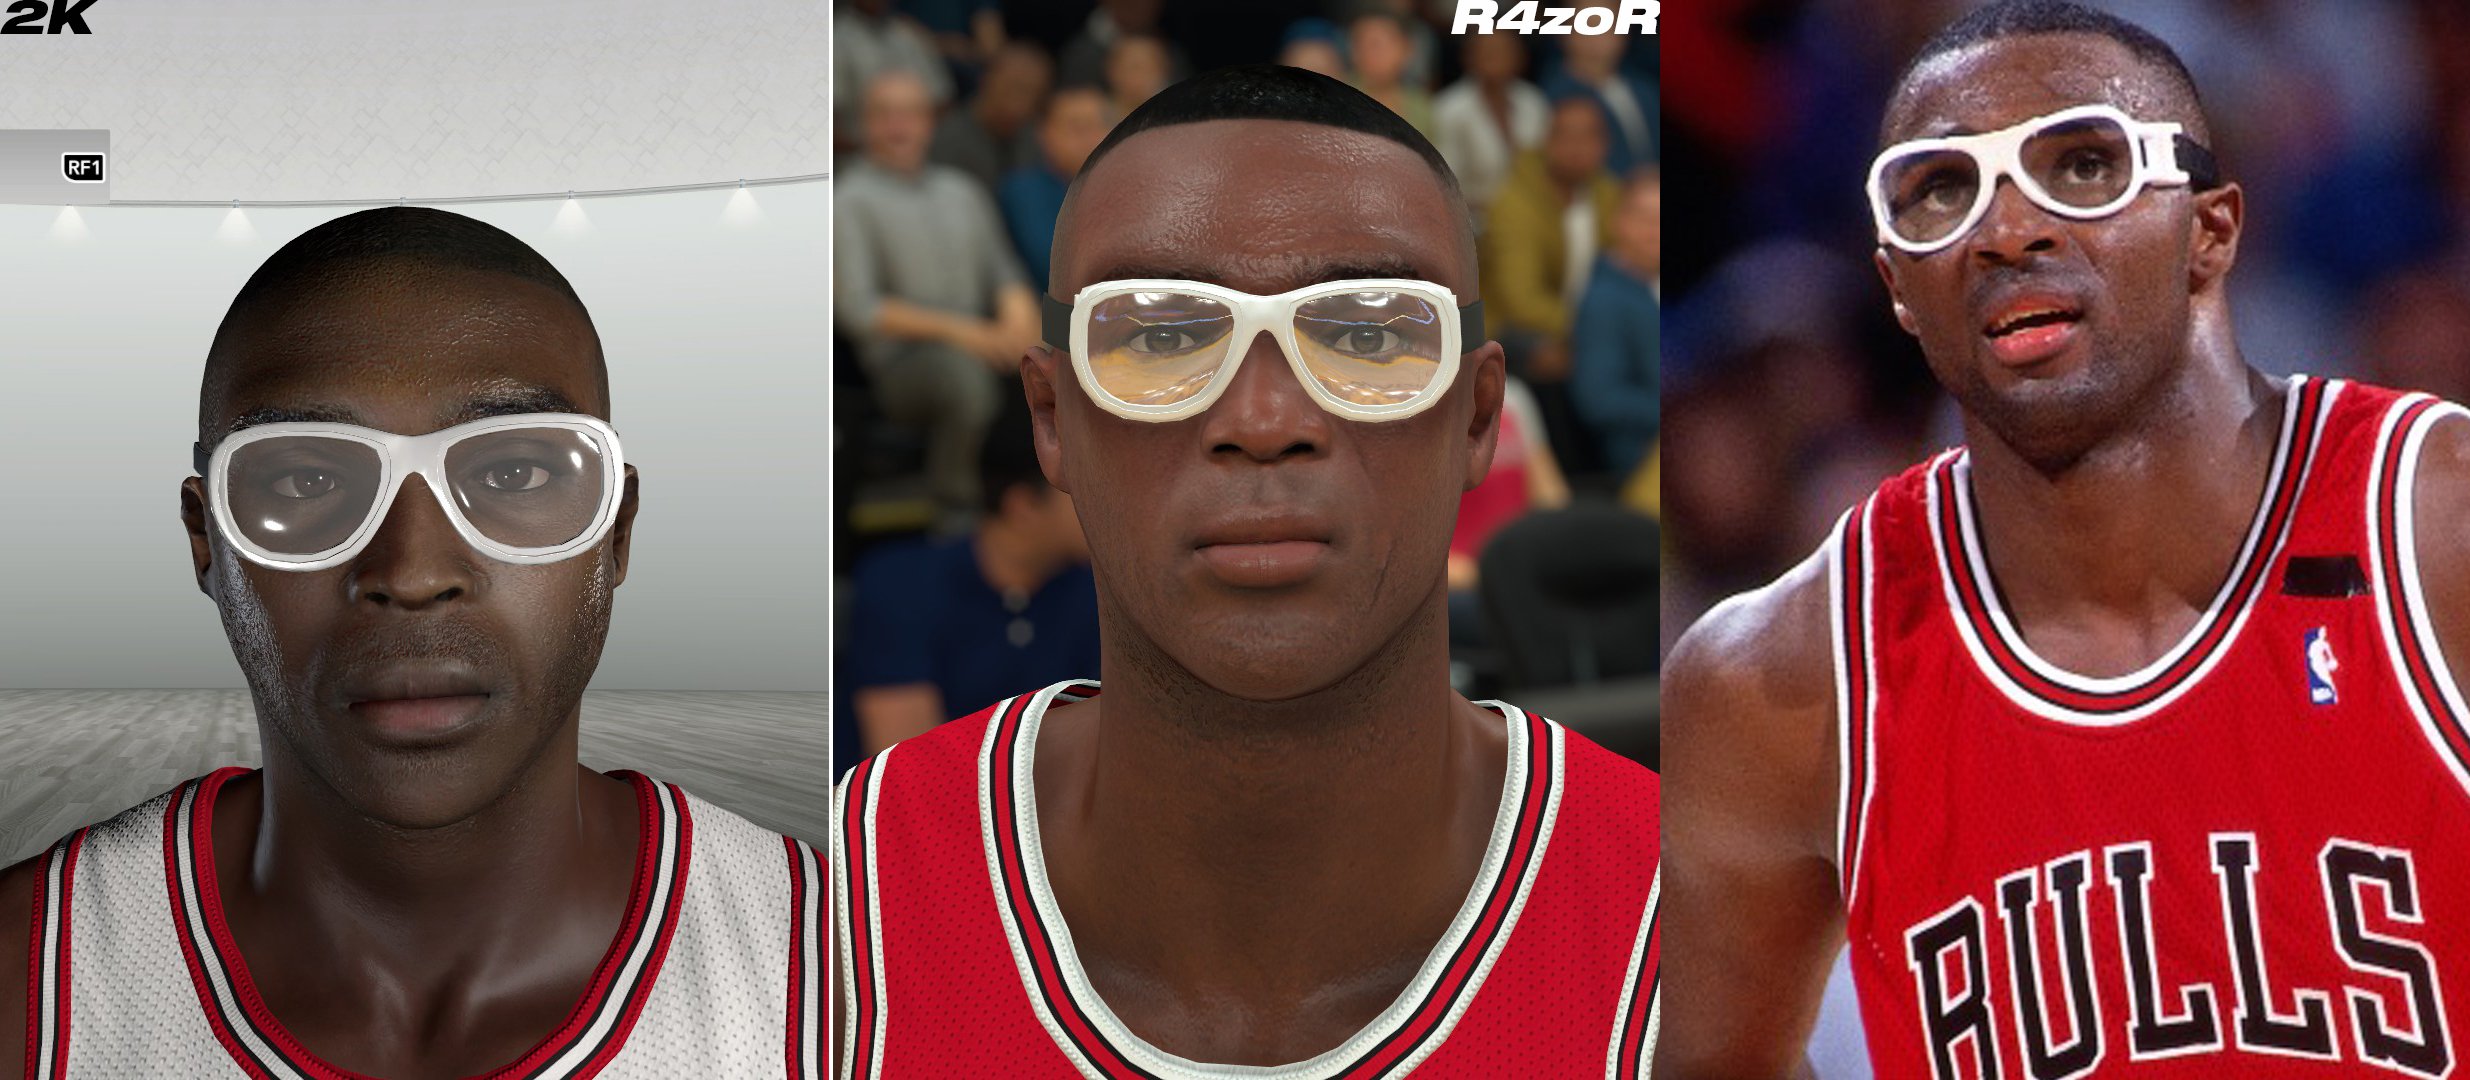 Razor on X: Second batch of players that i have done for the Chicago  #Bulls Legends Roster in #NBA2K19 for PC - Artis Gilmore, Horace Grant and  John Paxson.  / X